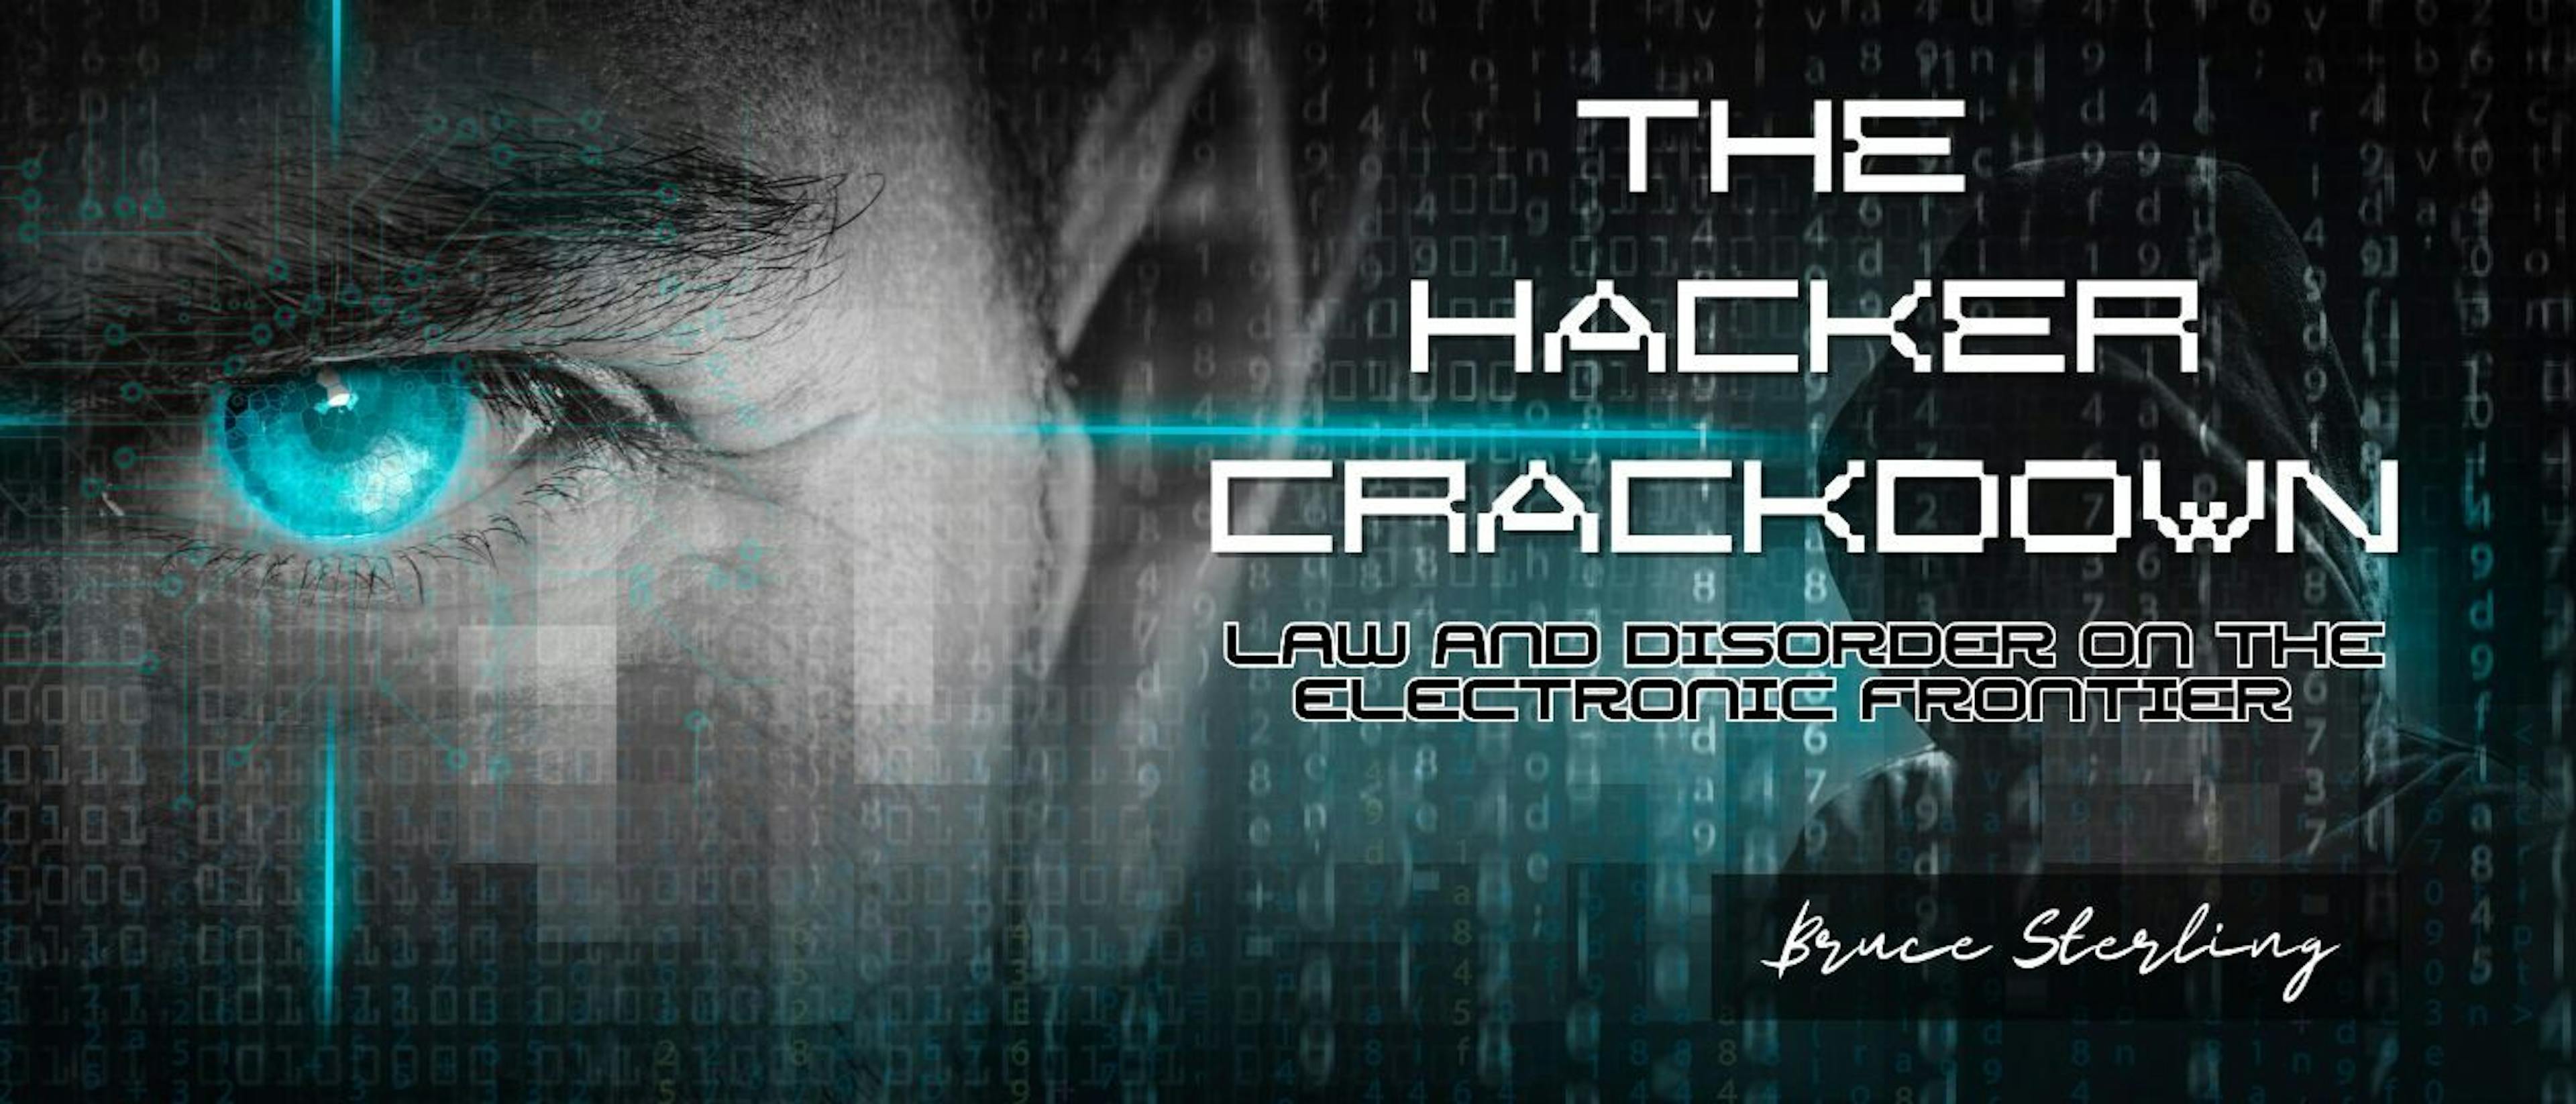 featured image - Electronic Afterword to The Hacker Crackdown, Halloween 1993